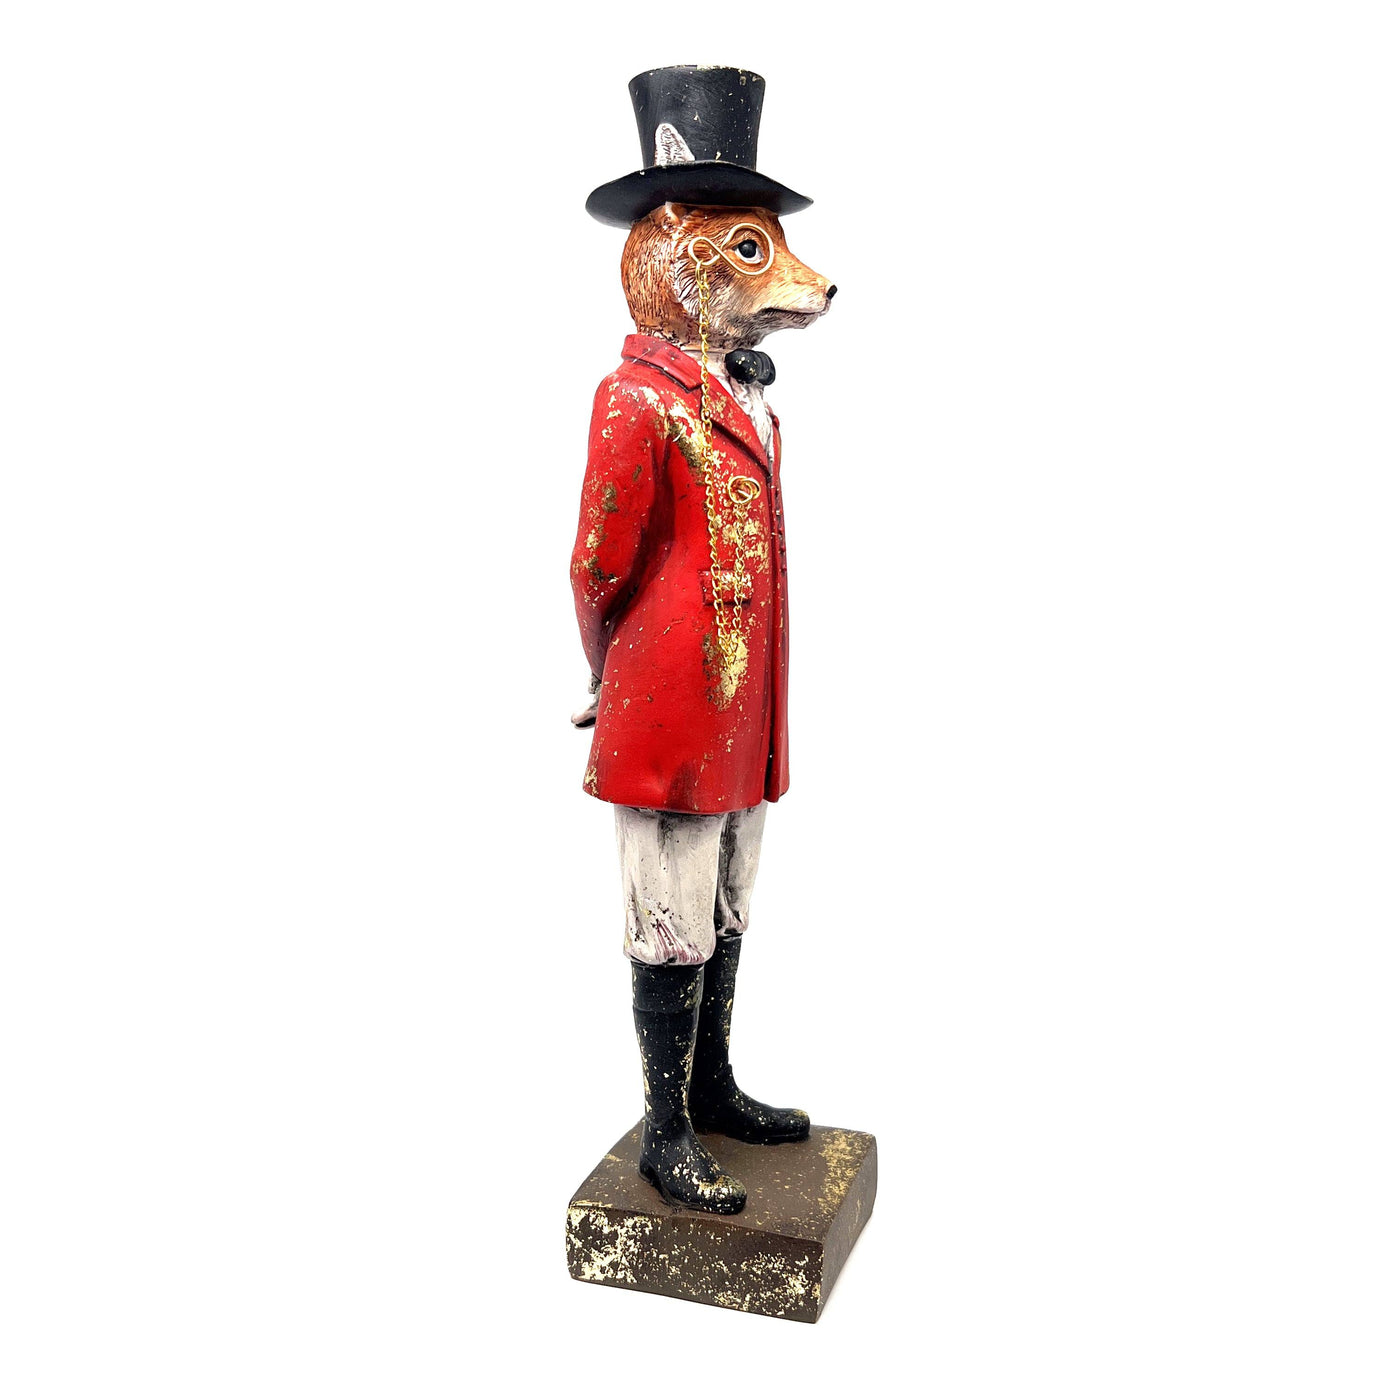 Dapper Fox with Top Hat and Monocle - Ornament - TwoBeeps.co.uk